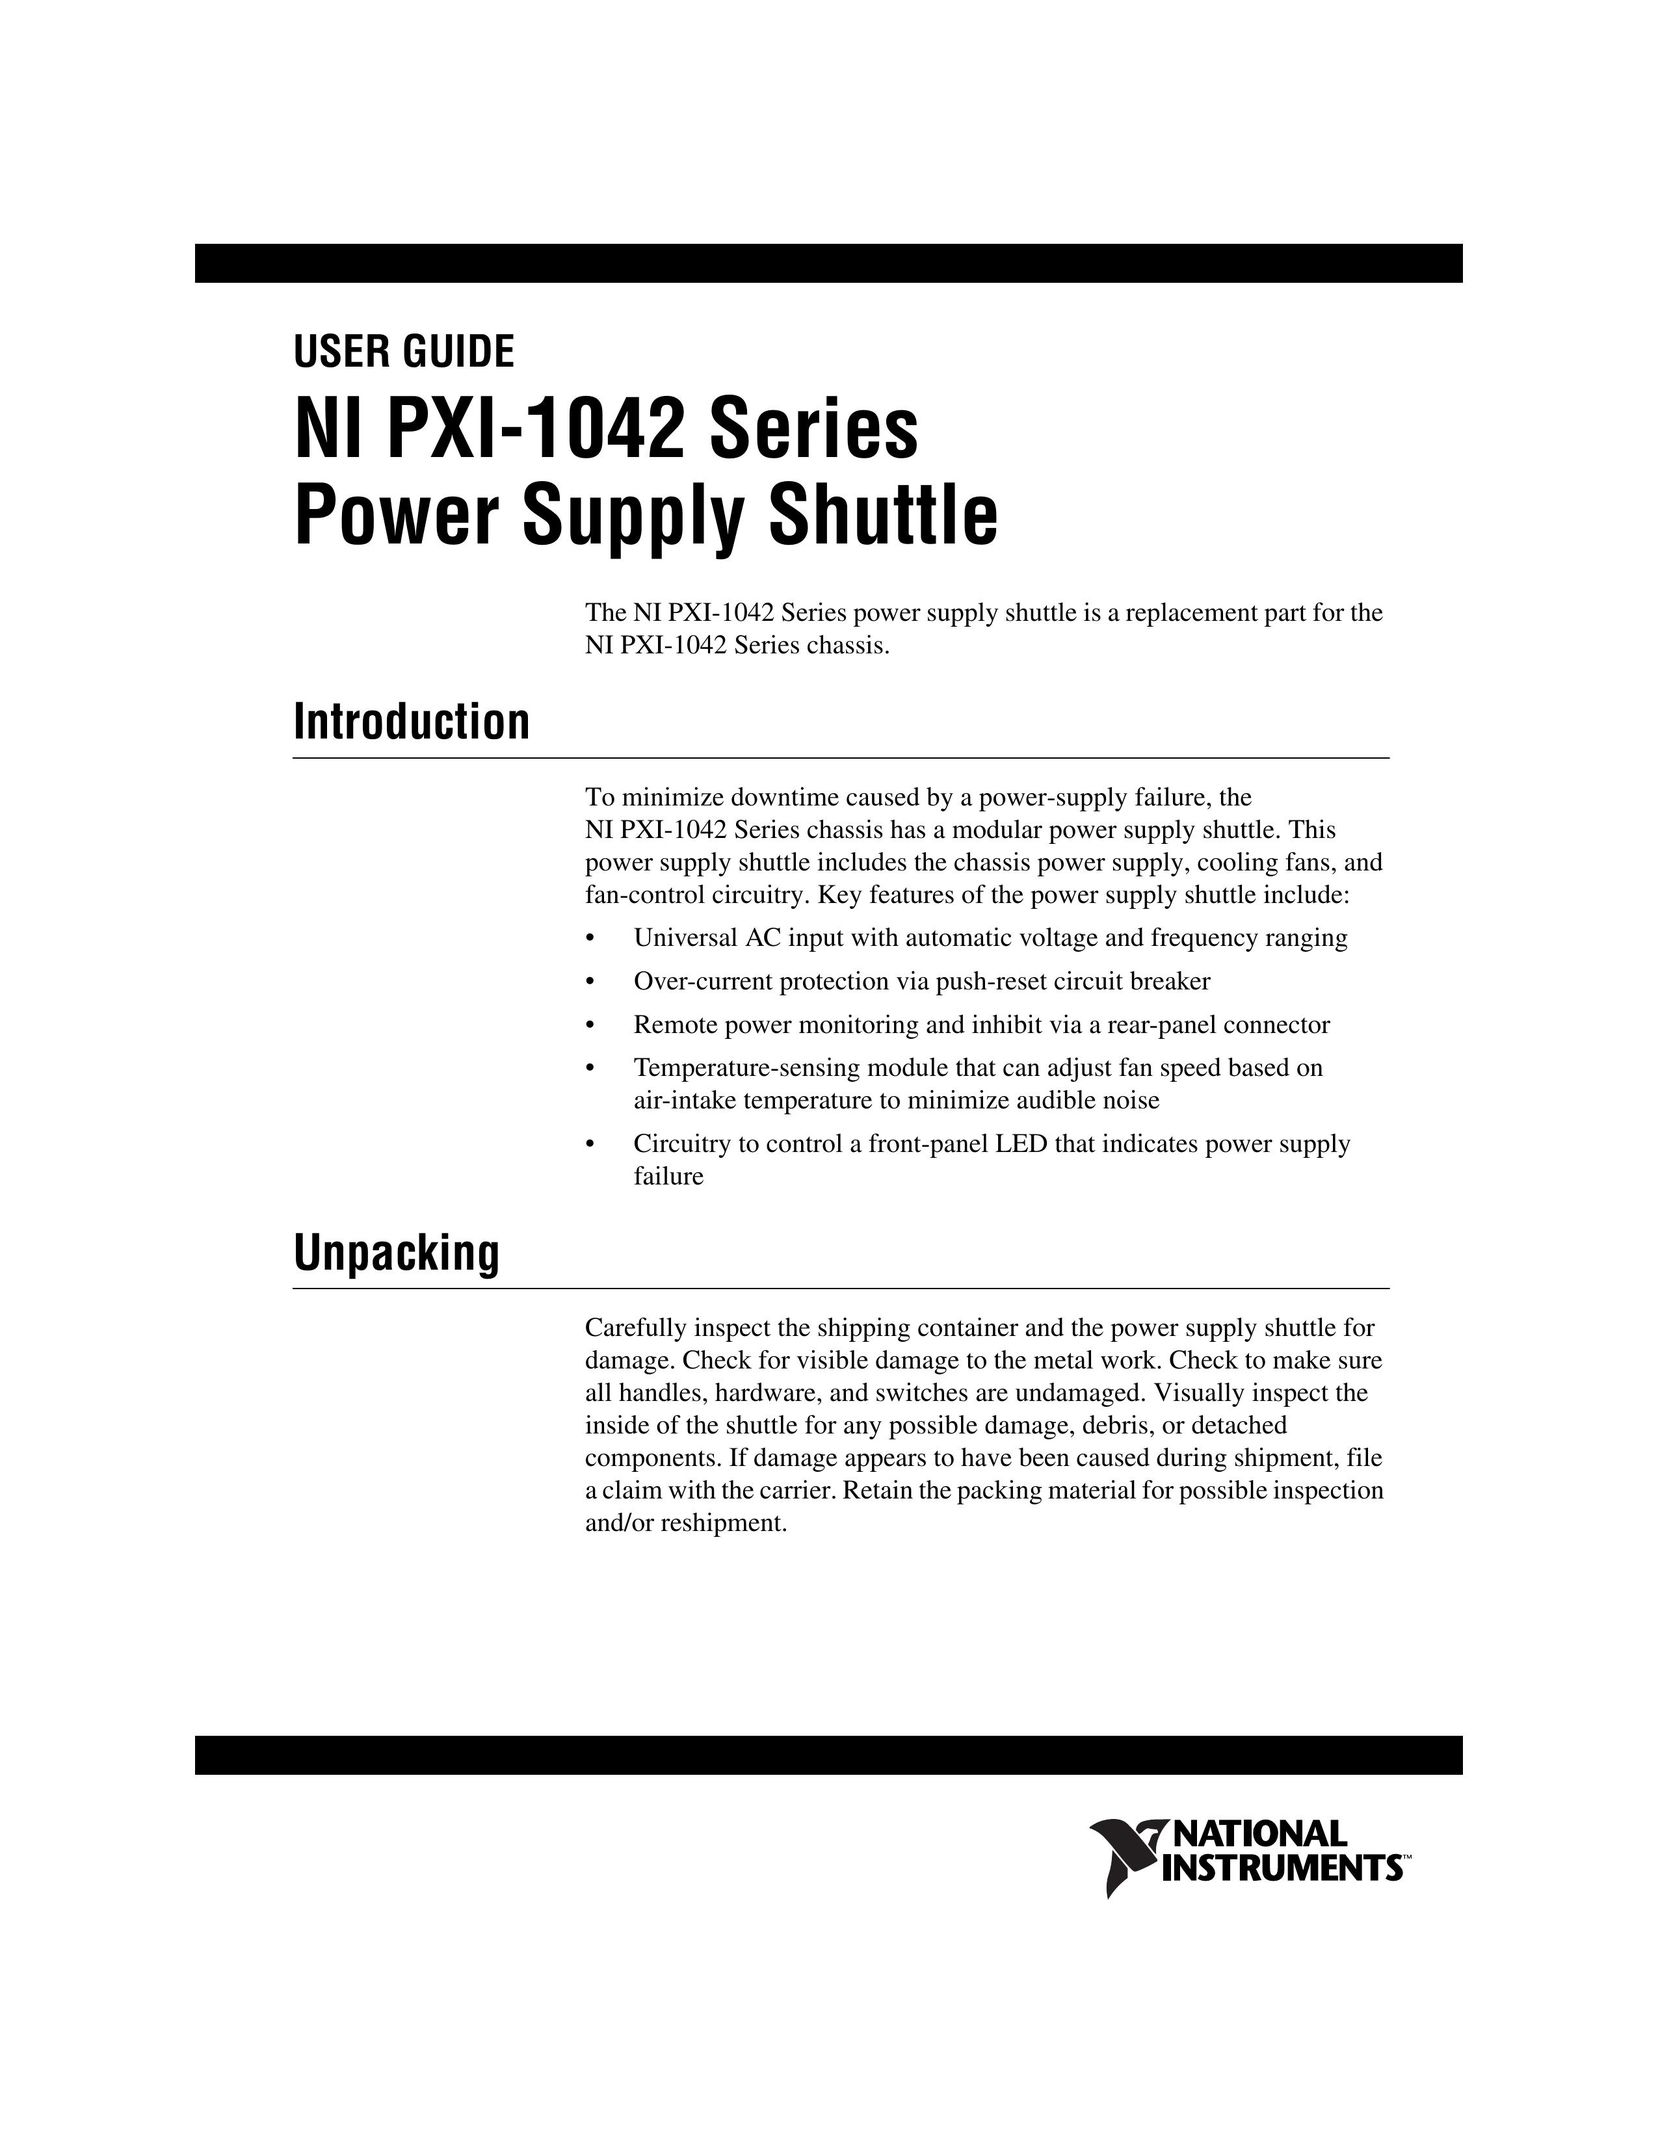 National Instruments NI PXI-1042 Series Power Supply User Manual